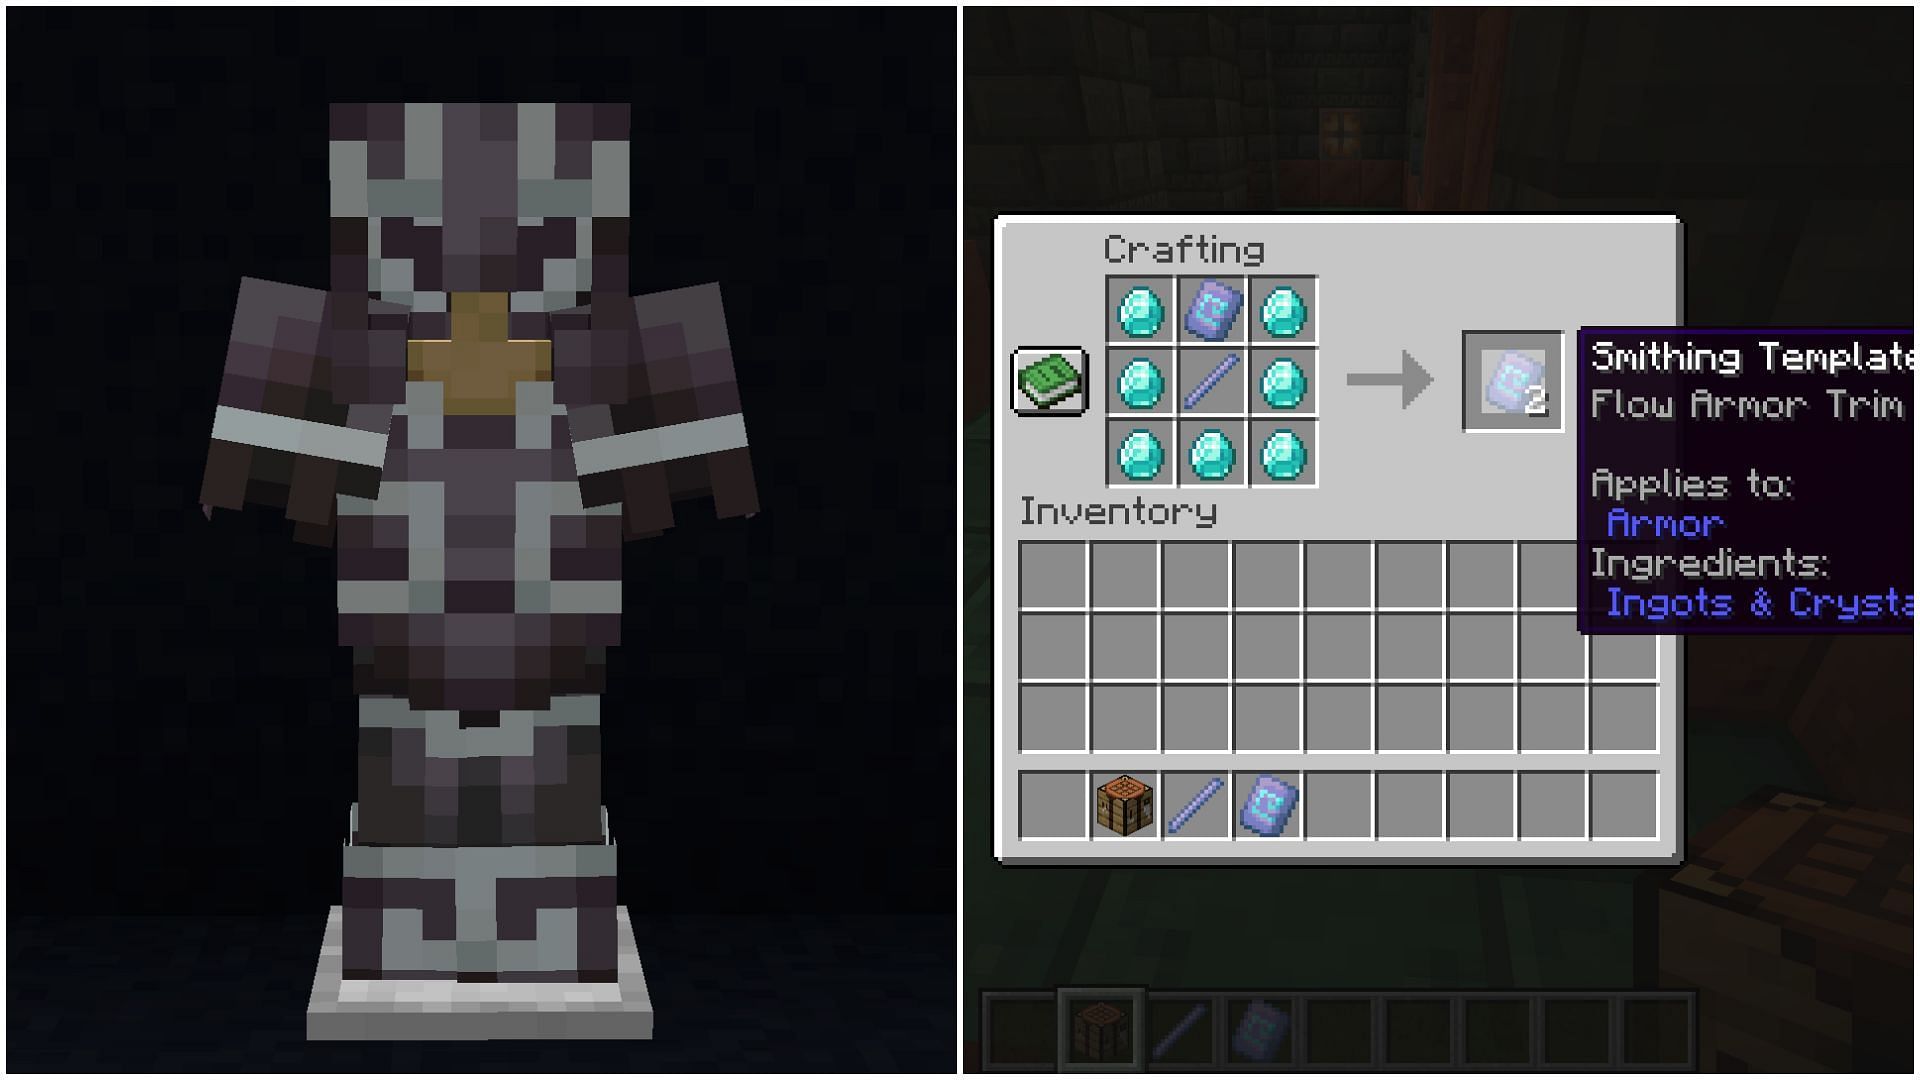 Armor trim can be applied to armor through a smithing table and duplicated through diamonds and specific items (Image via Mojang Studios)